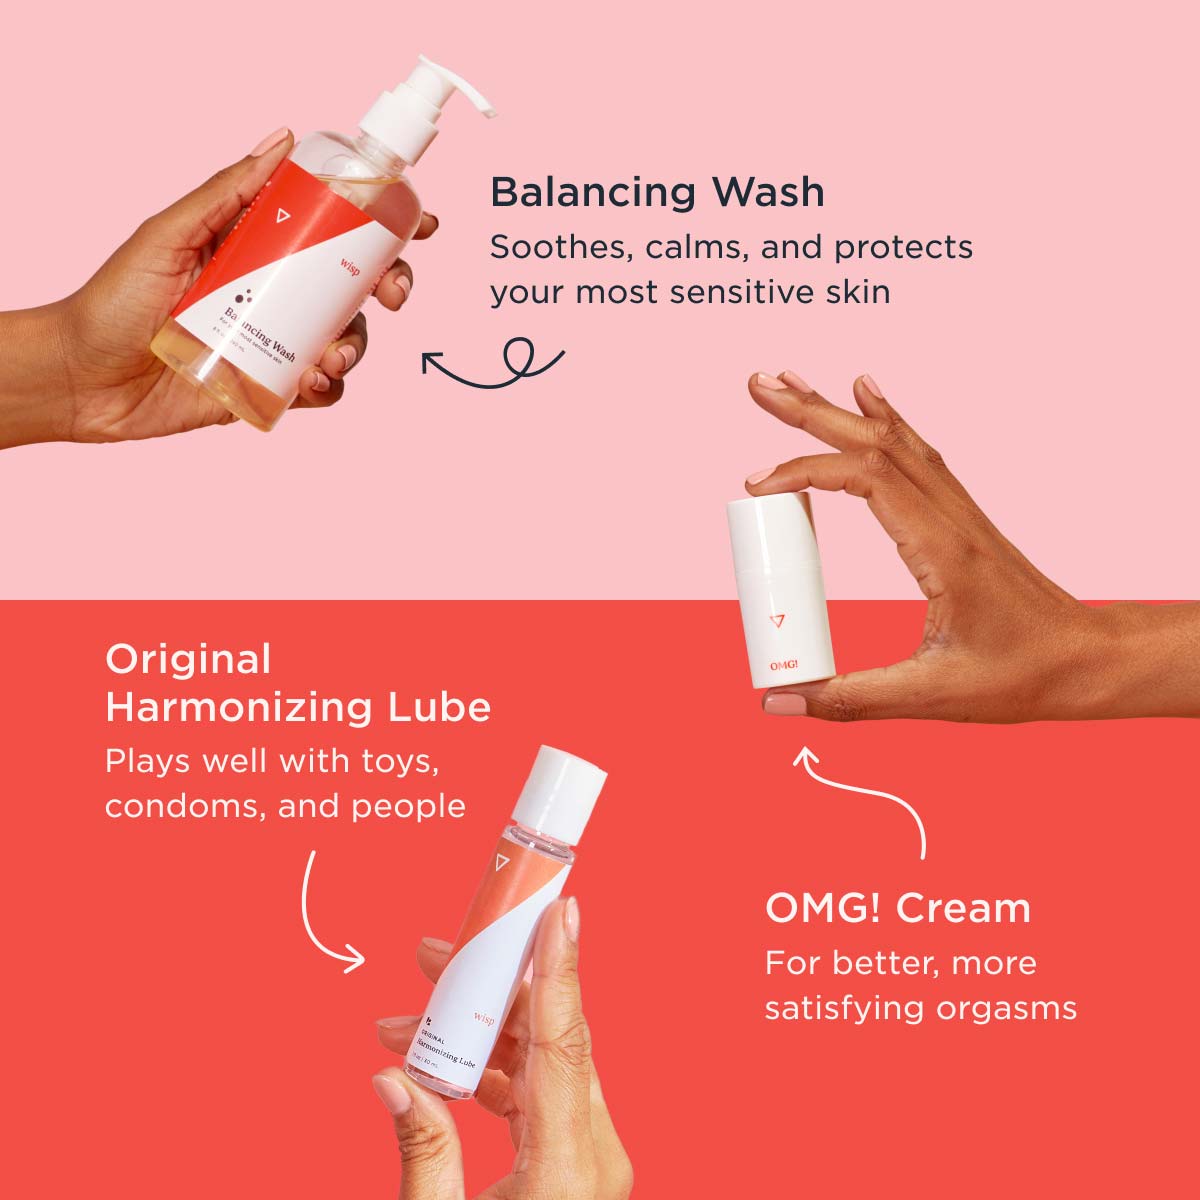 Graphic of 3 hands holding each bundle product and highlighted info about each product on a pink and red background